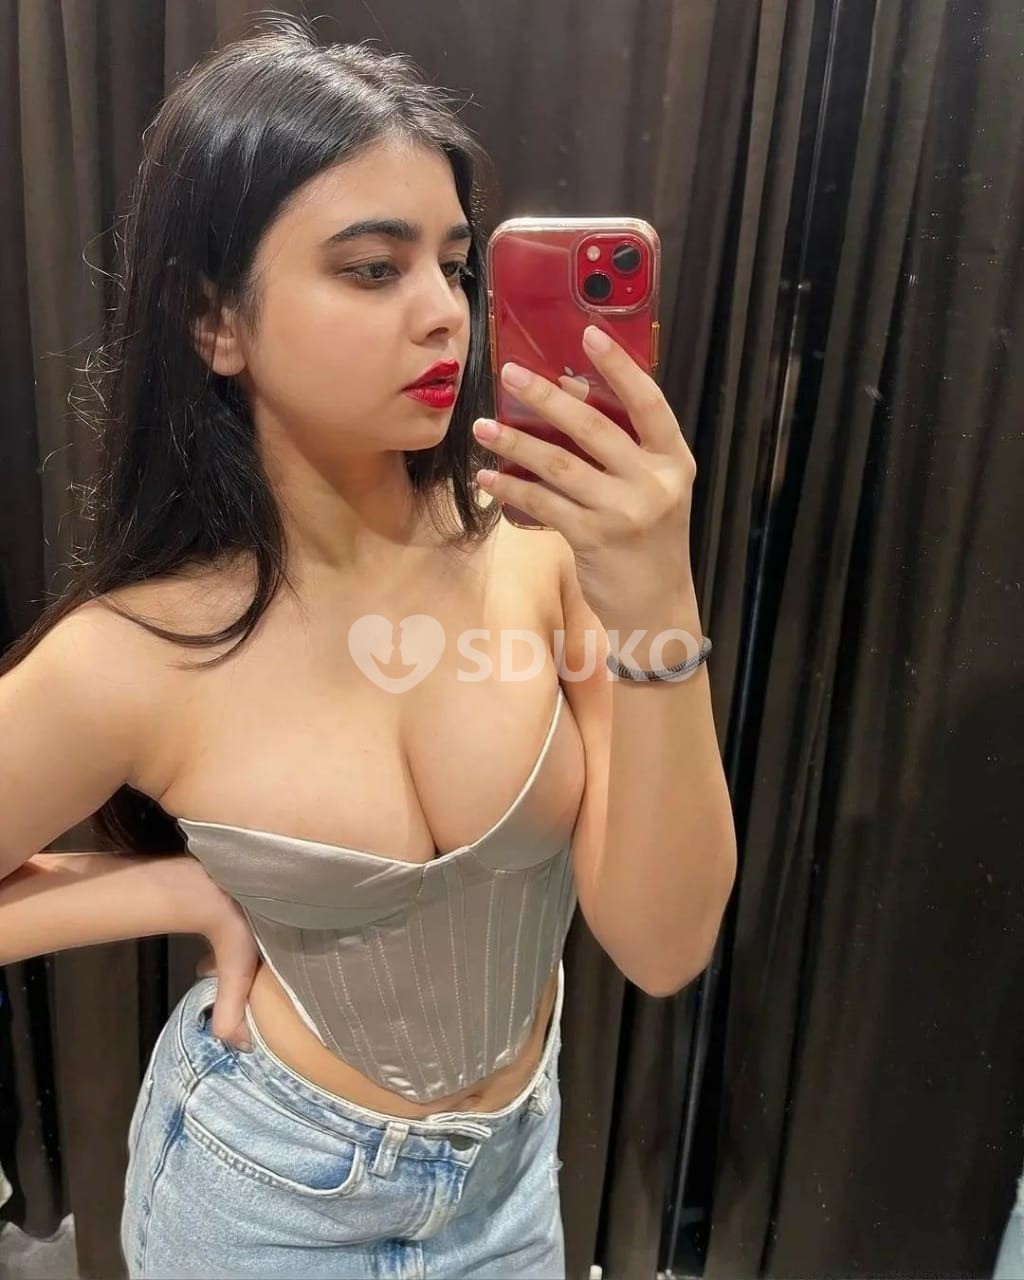 KATRAJ VIP TODAY LOW:" PRICE ESCORT 🥰SERVICE 100% SAFE AND SECURE ANYTIME CALL ME 24 X 7 SERVICE AVAILABLE 100% SAFE